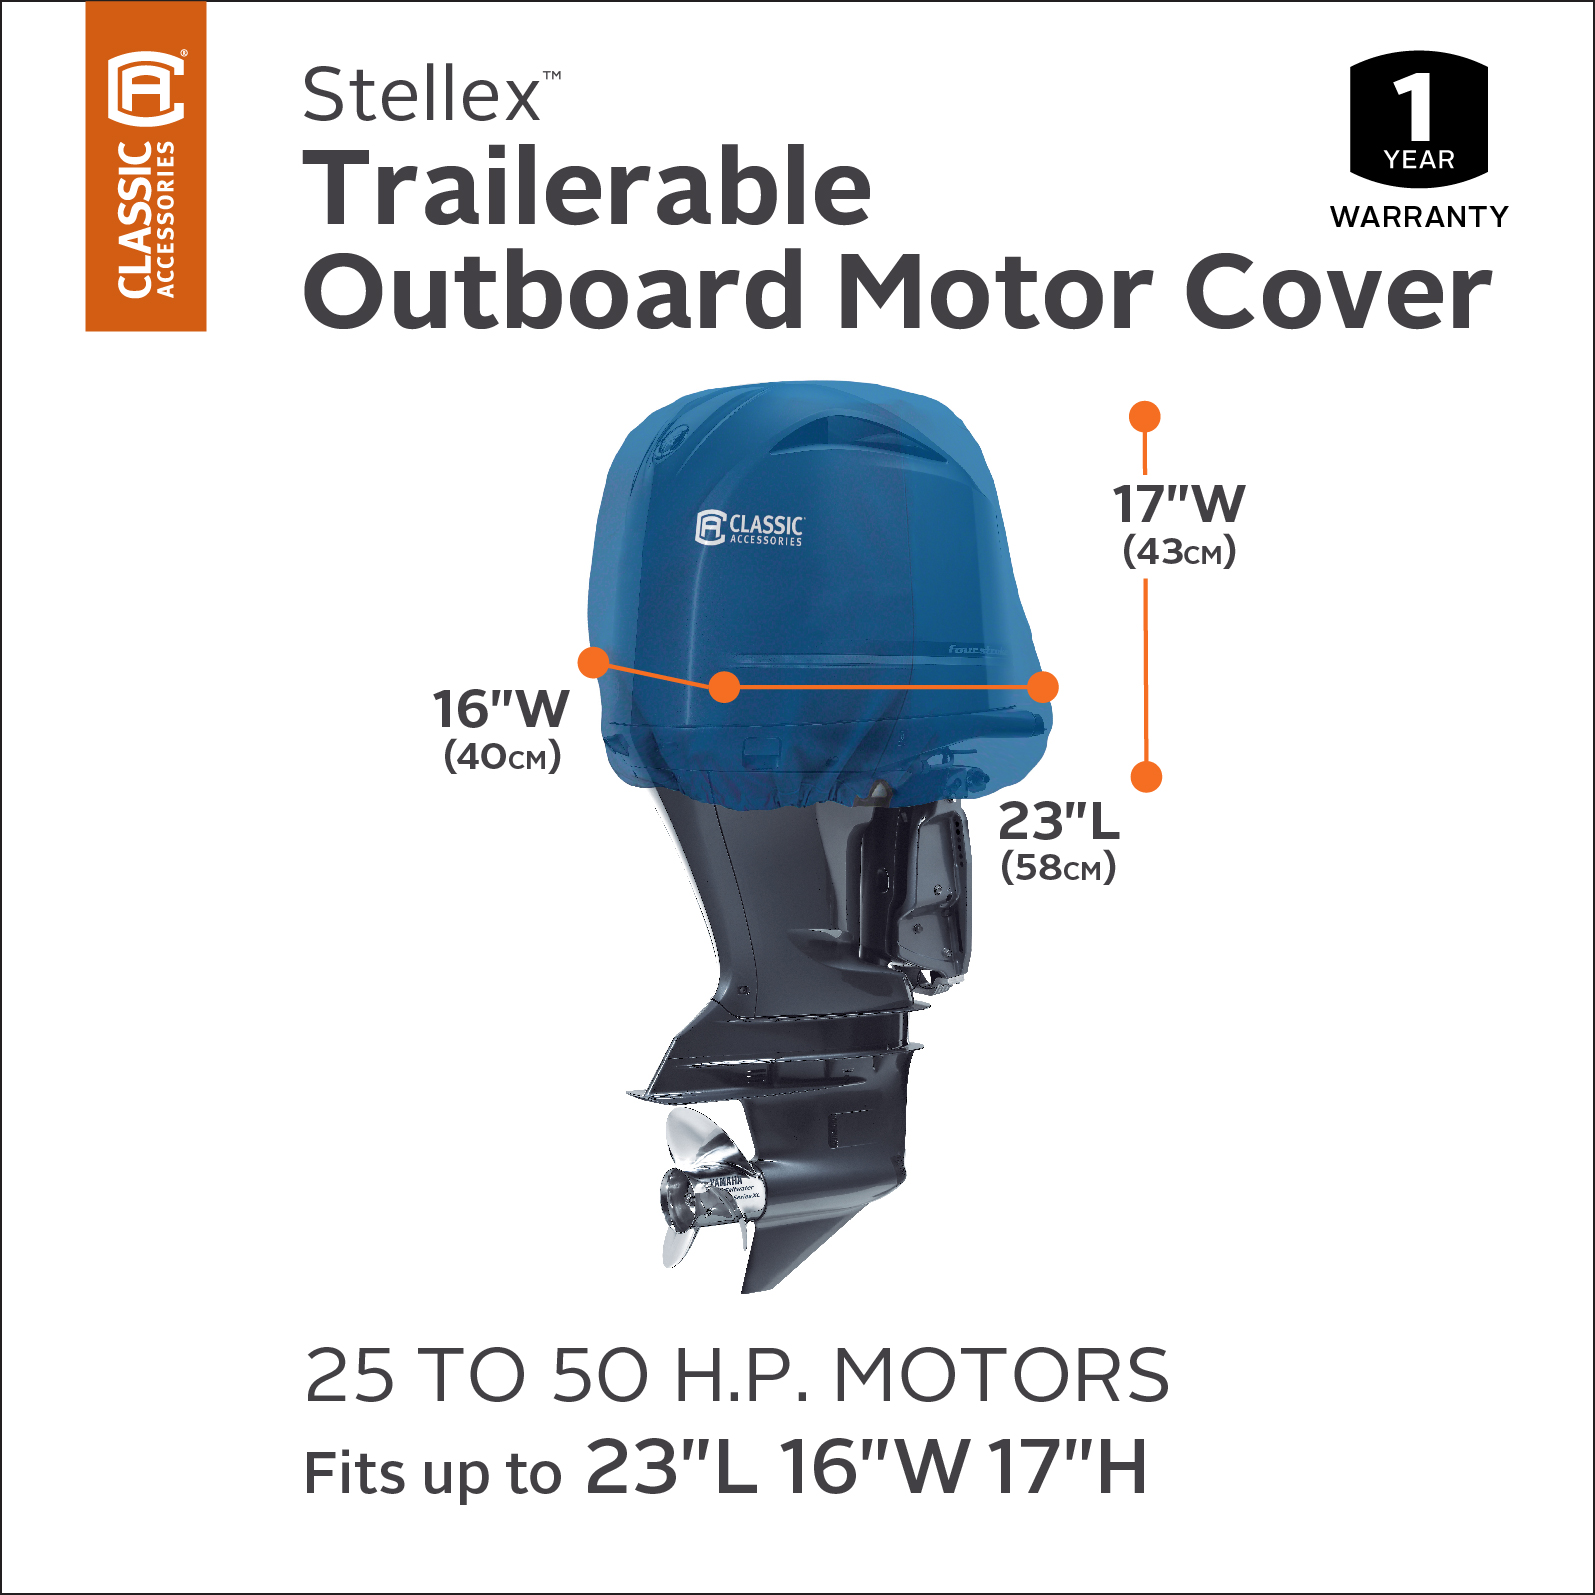 Classic Accessories Stellex™ Trailerable Outboard Motor Cover, 25-50 H.P. Motors - image 2 of 5